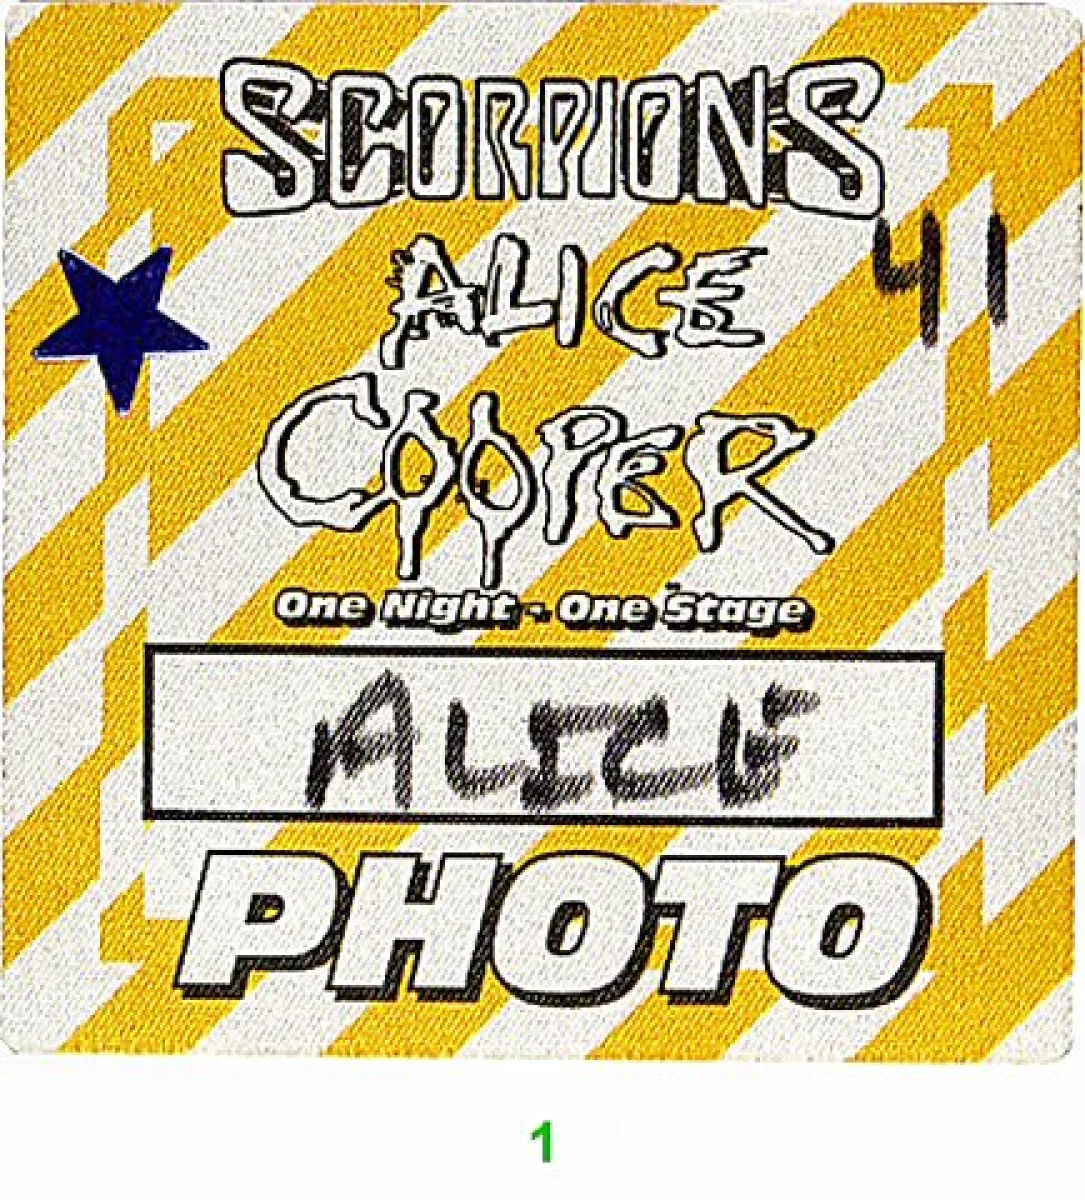 Scorpions Backstage Pass From Jones Beach Aug 2 1996 At Wolfgang S